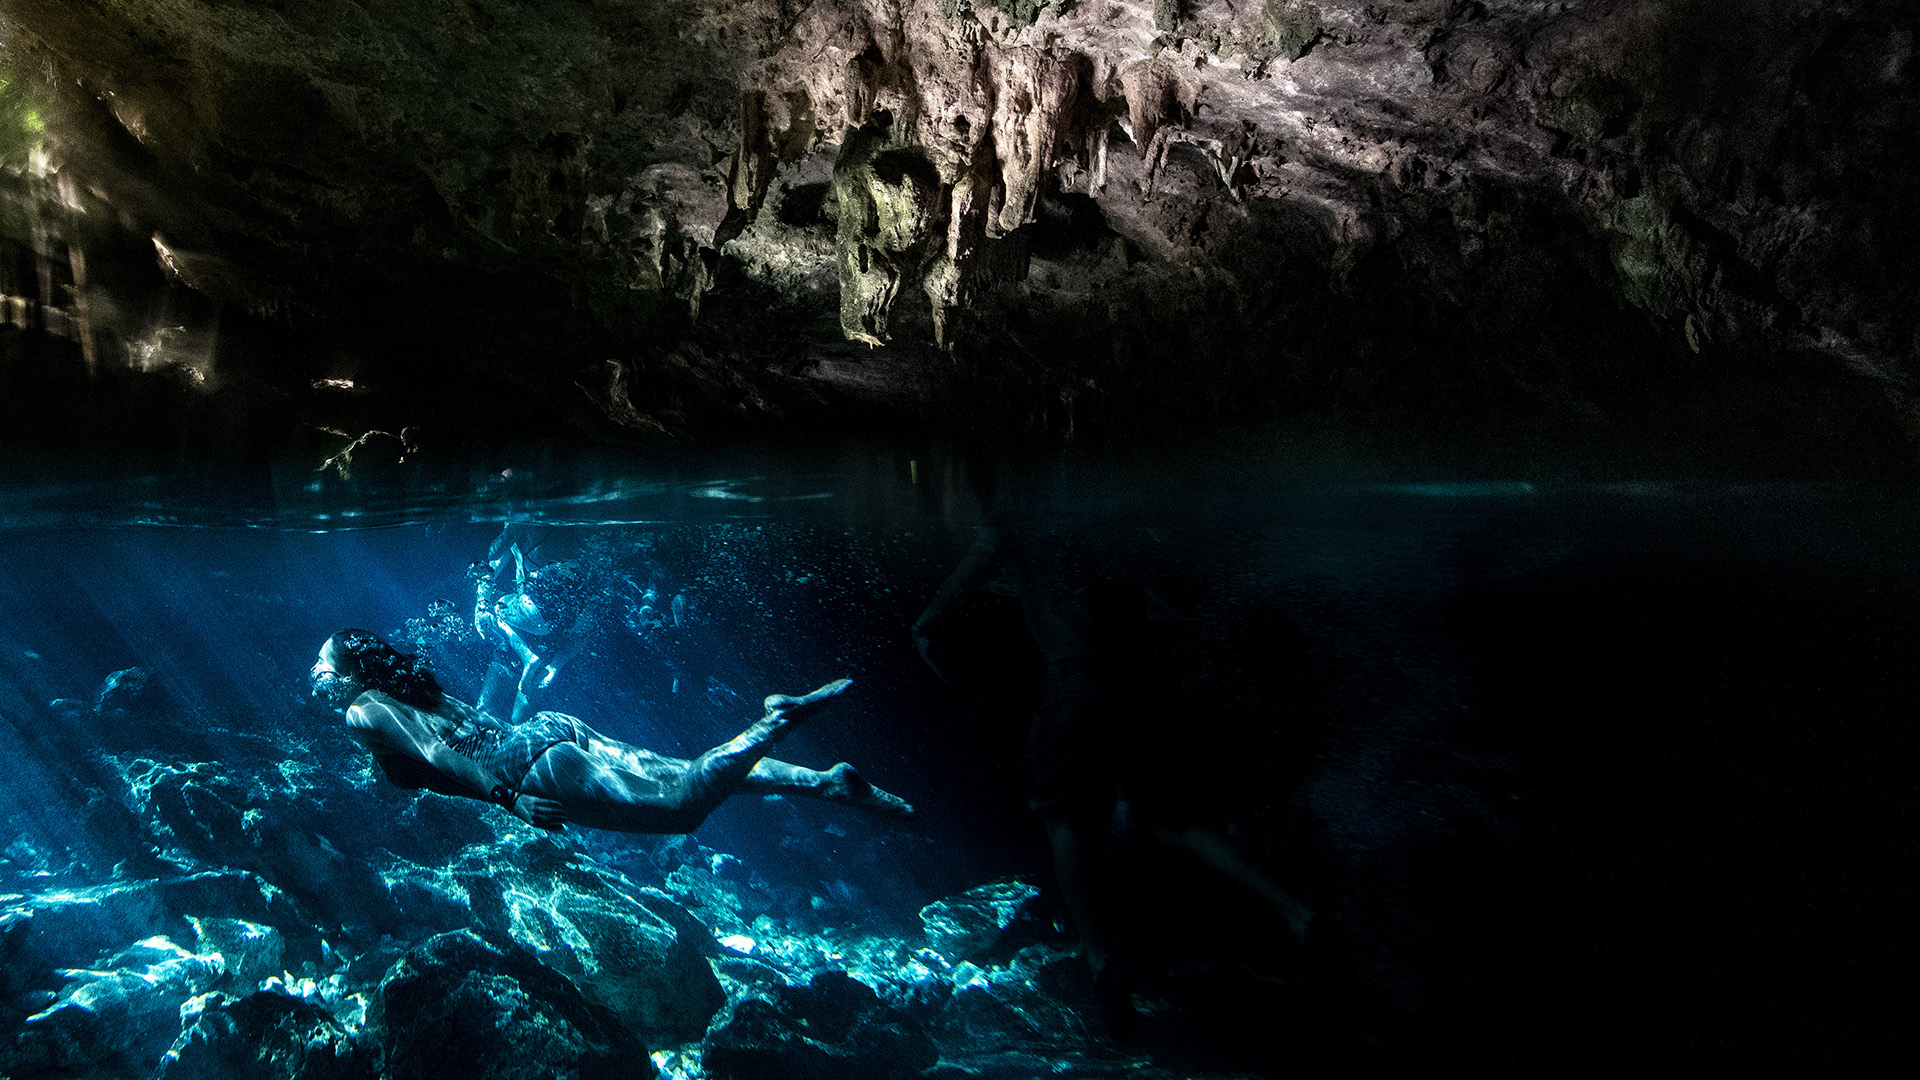 Writer Kassondra Cloos dives through the crystal-clear water at Cenote Dos Ojos.